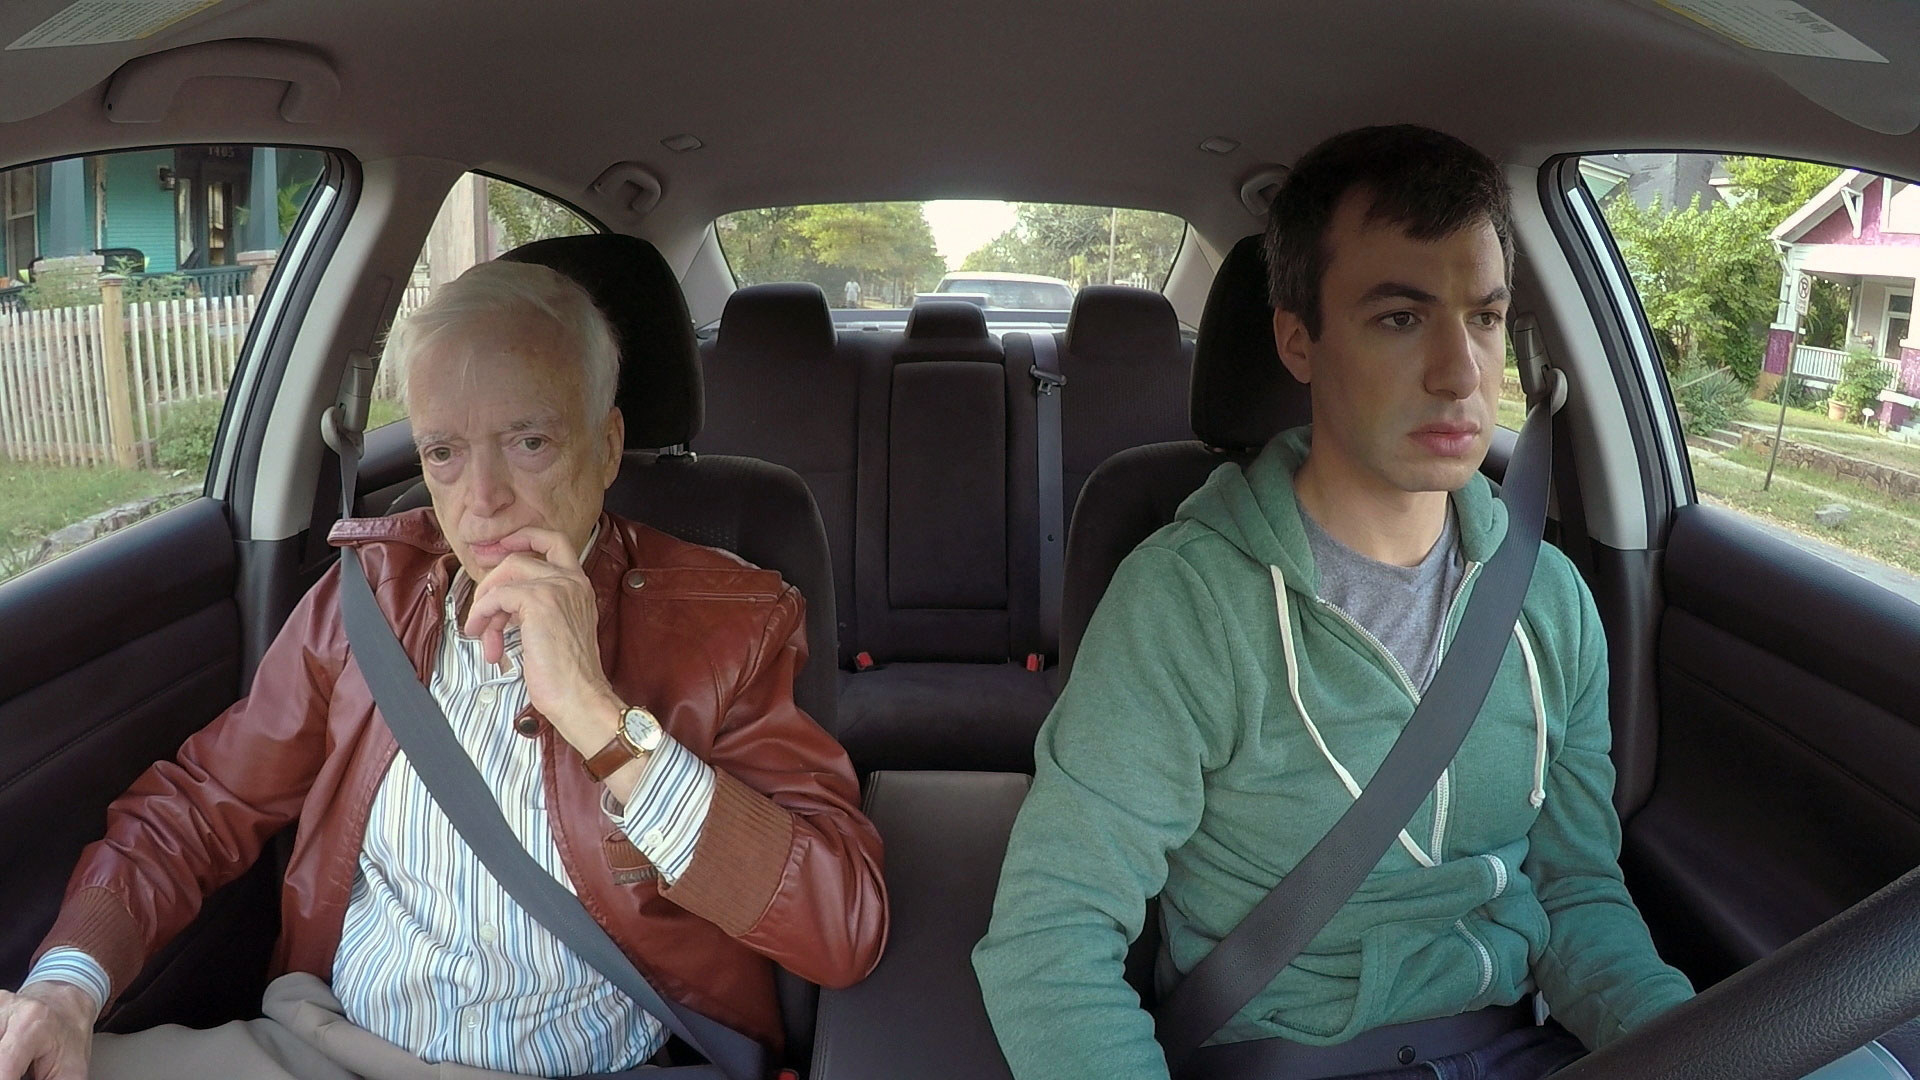 Nathan Fielder drives alongside Bill Heath, a celebrity impersonator he previously employed on &quot;Nathan For You.&quot;